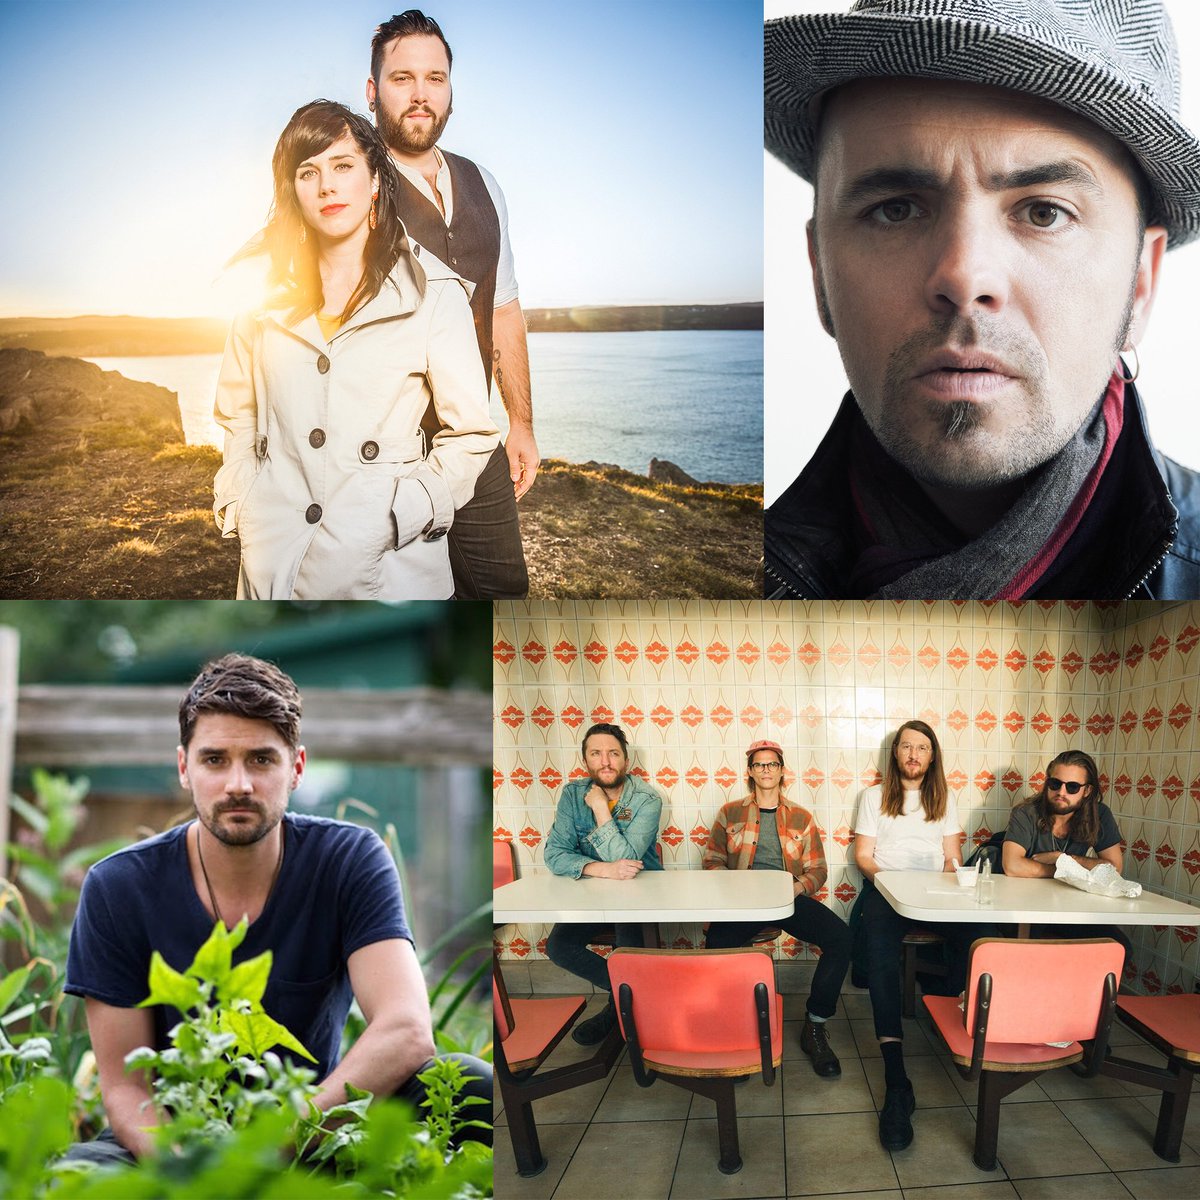 Limited tickets selling for another # @Windsongfest  featuring @HawksleyWorkman #The @thewoodensky @heytimbaker @FortunateOnesNL    and more, where music fans can get #upclose to the artists. #friendlyvibe #BYOB #Bonfires #Camping #Liveconcerts #BBQ's